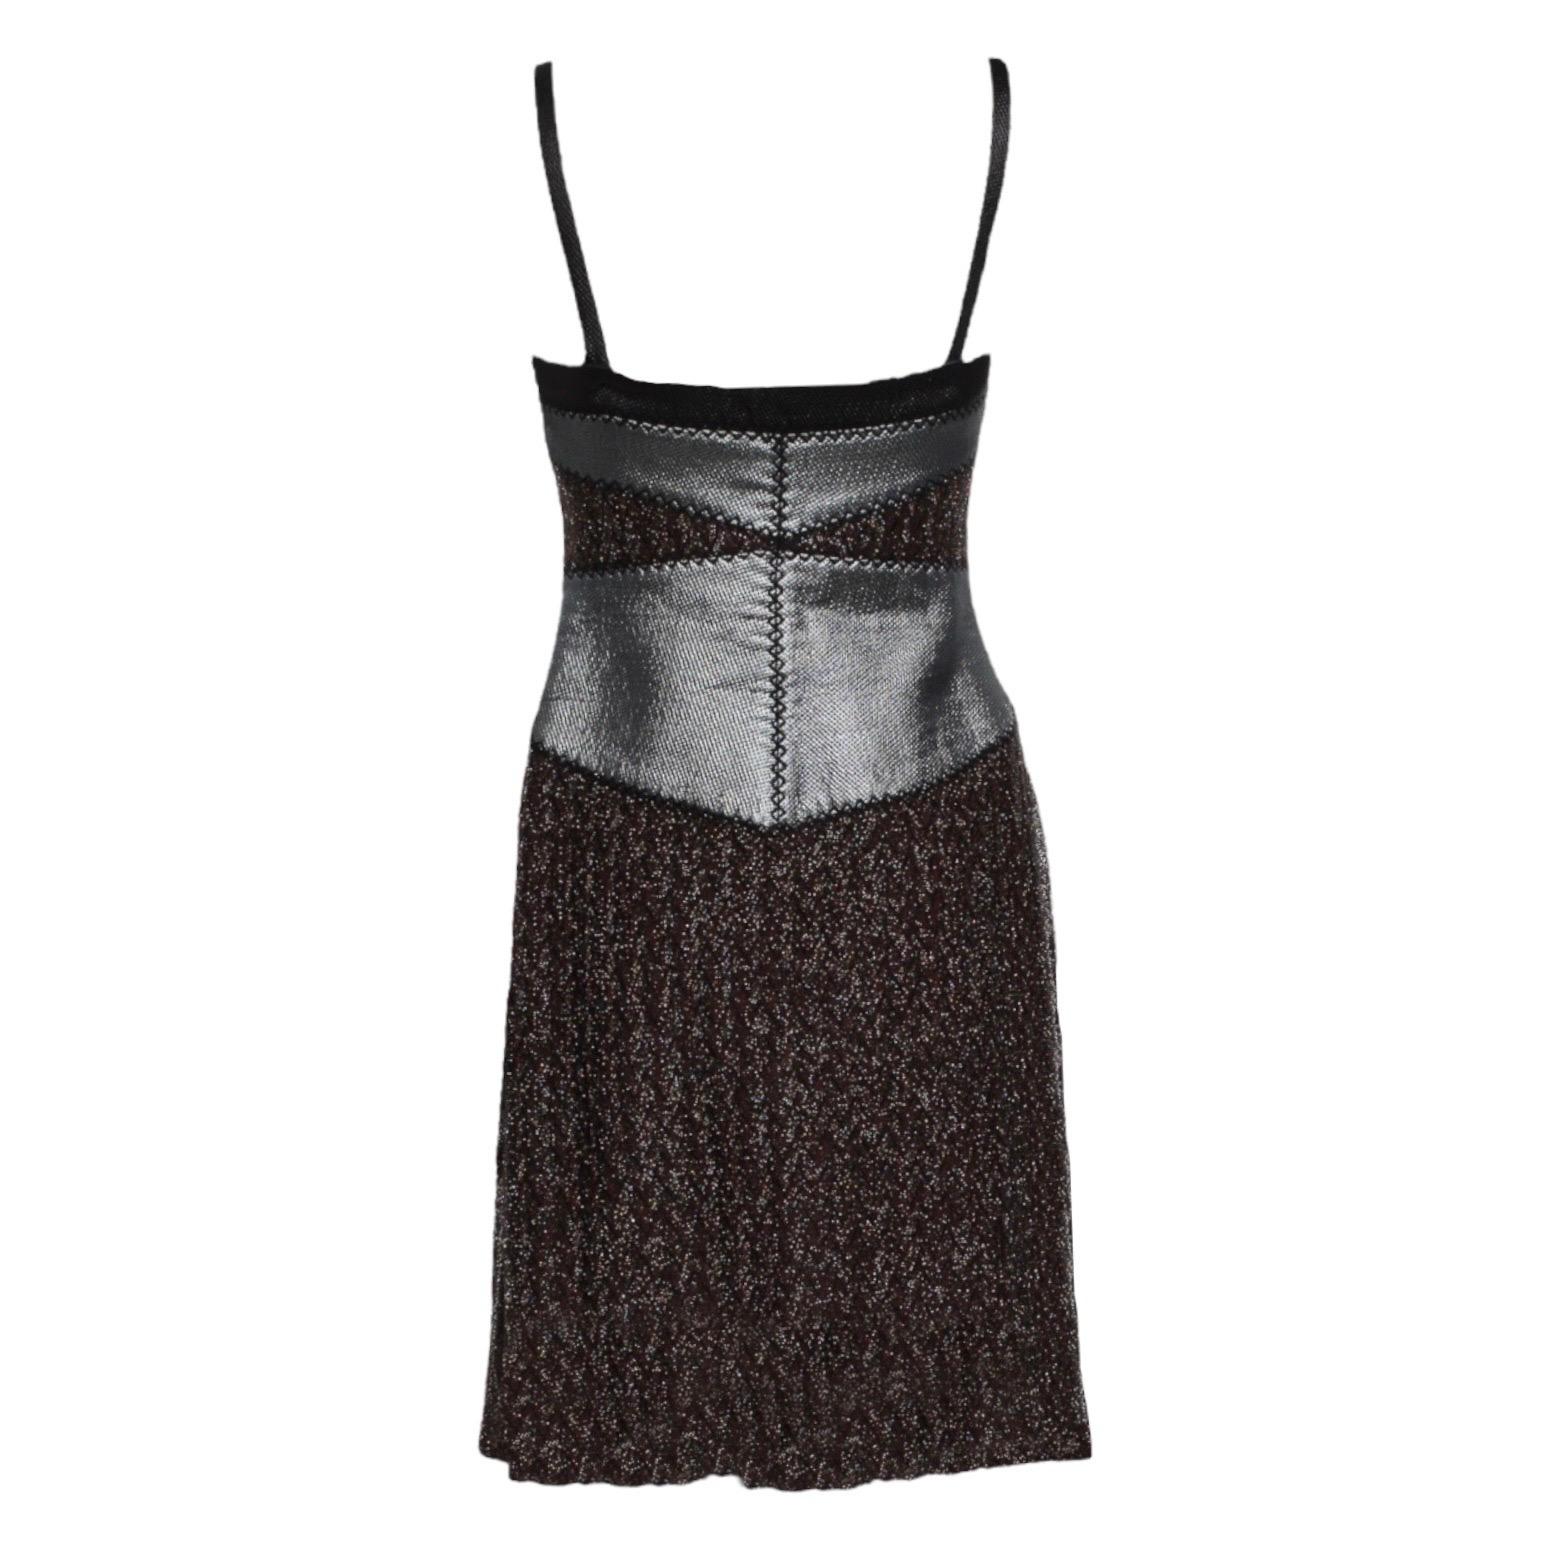 Missoni's sexy bodycon dress in the label's signature crochet knit lets you sparkle like a star
Beautiful metallic crochet knit fabric 
Highlighted with a metallic-tone fabric inserts
Detachable straps, can be worn strapless or with straps